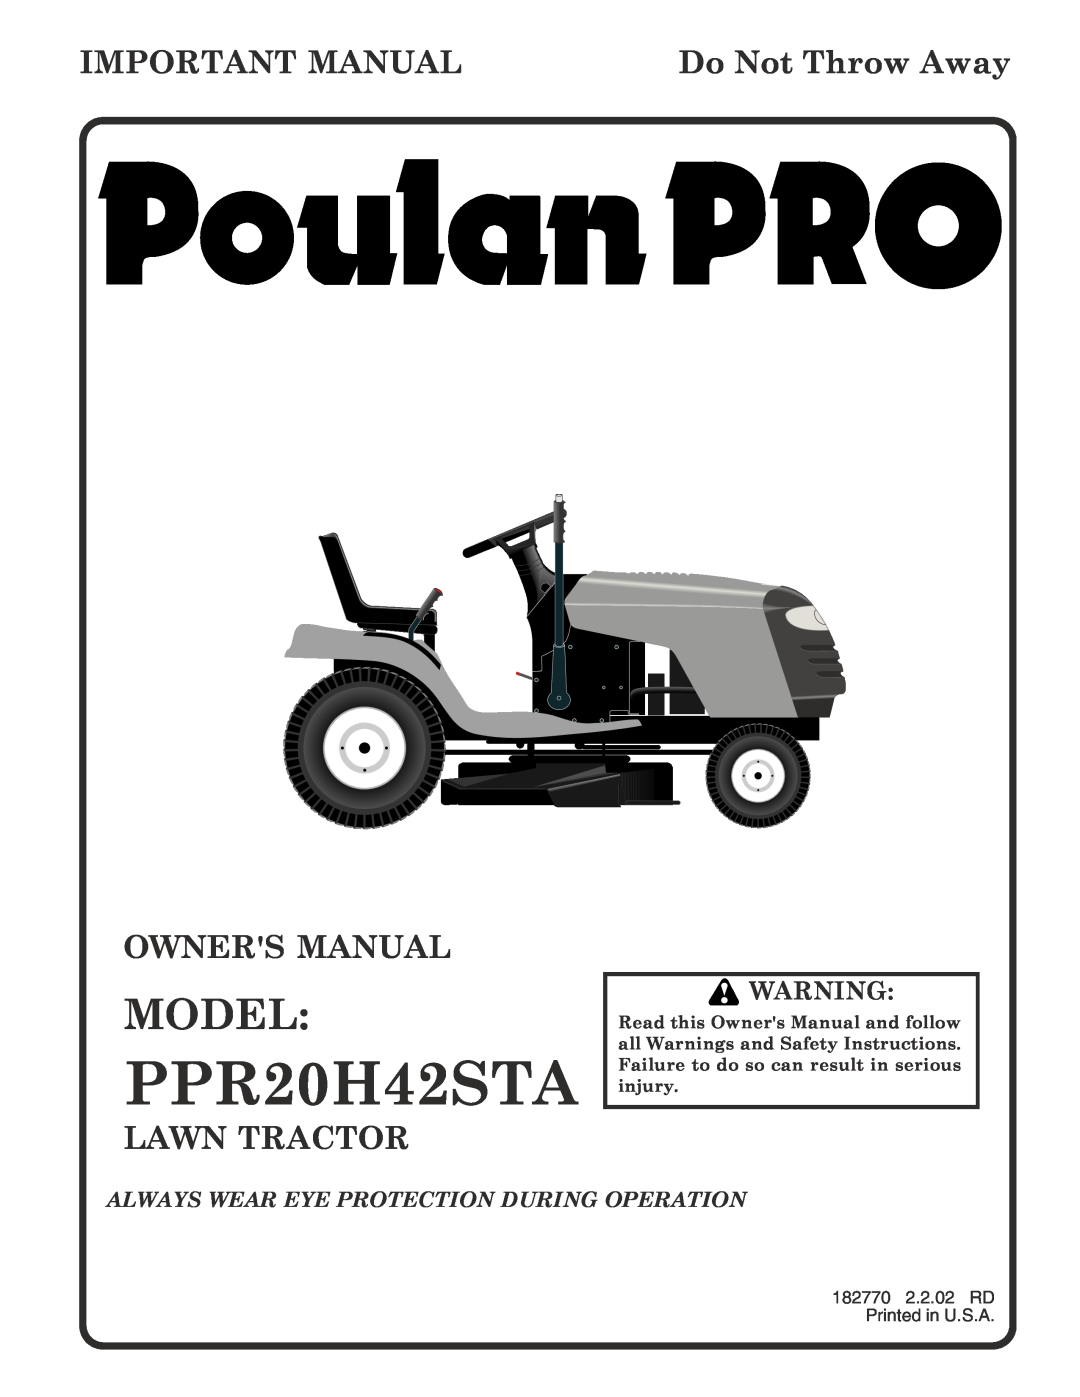 Poulan PPR20H42STA owner manual Model, Important Manual, Do Not Throw Away, Owners Manual, Lawn Tractor 